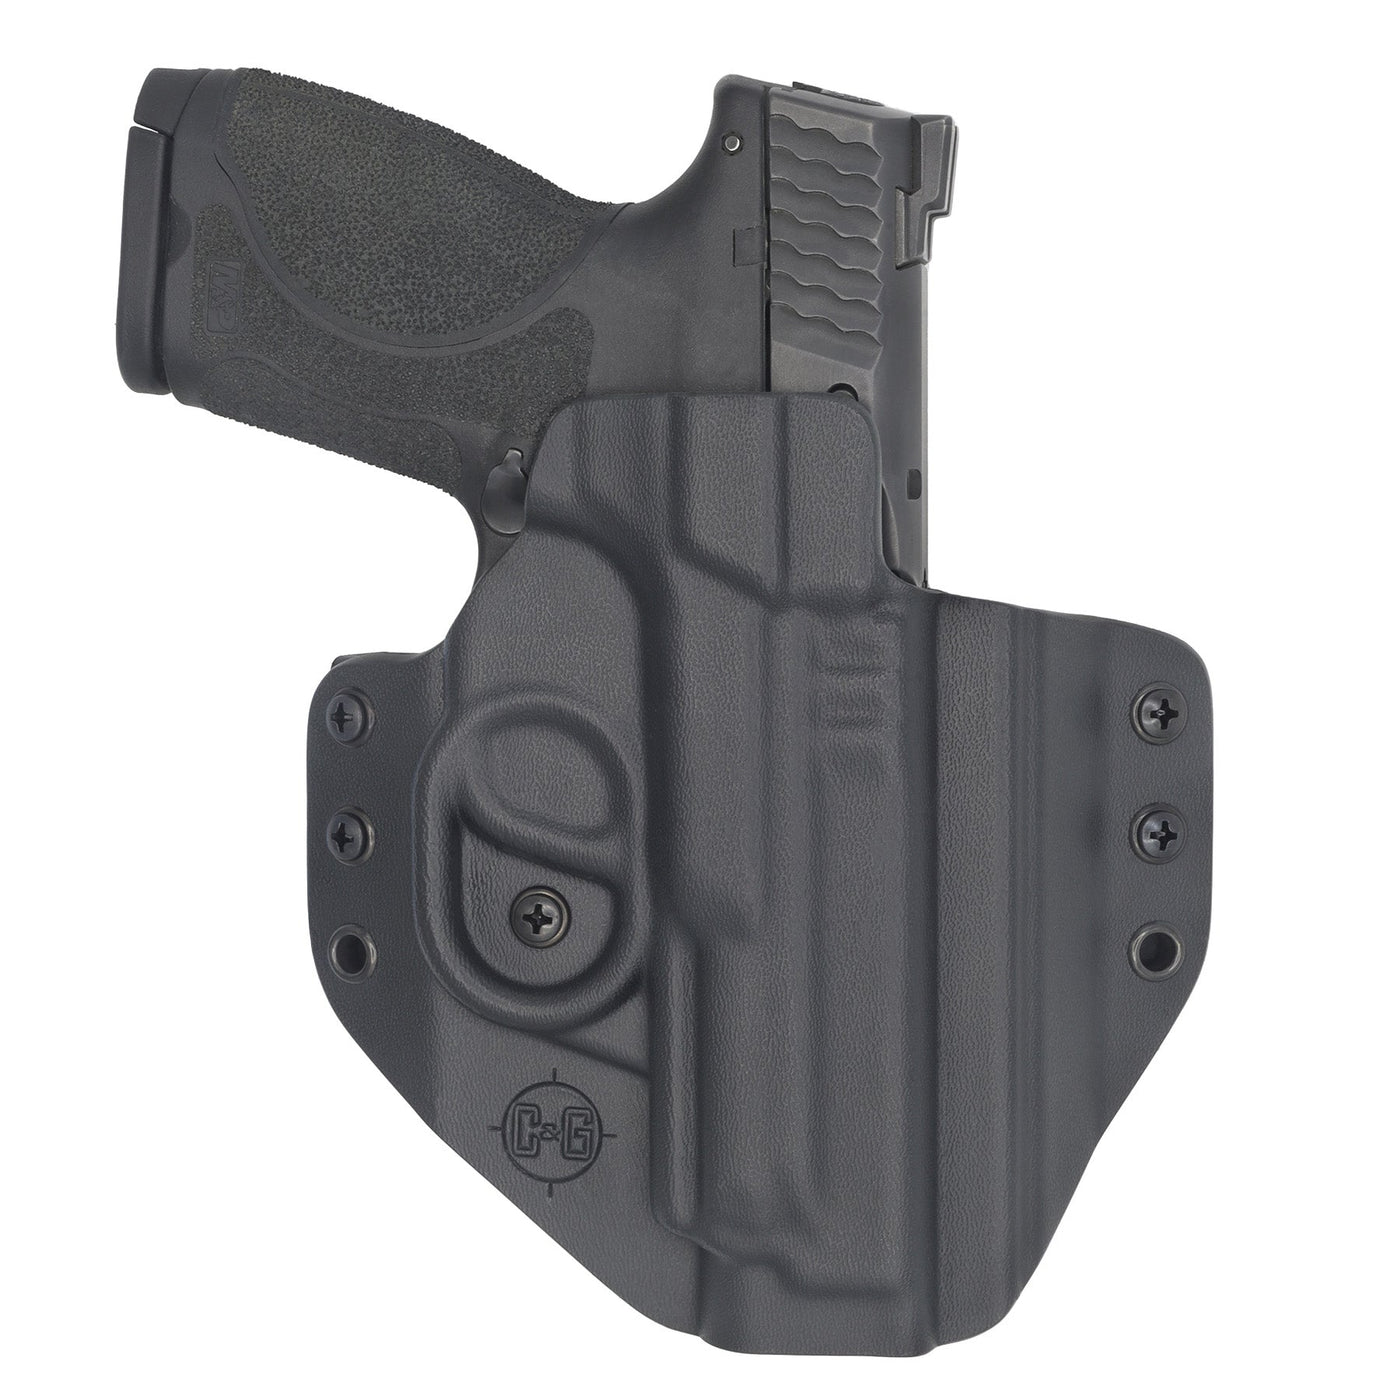 C&G Holsters quick ship Covert OWB kydex holster for Smith & Wesson M&P 2.0 9/40 in holstered position